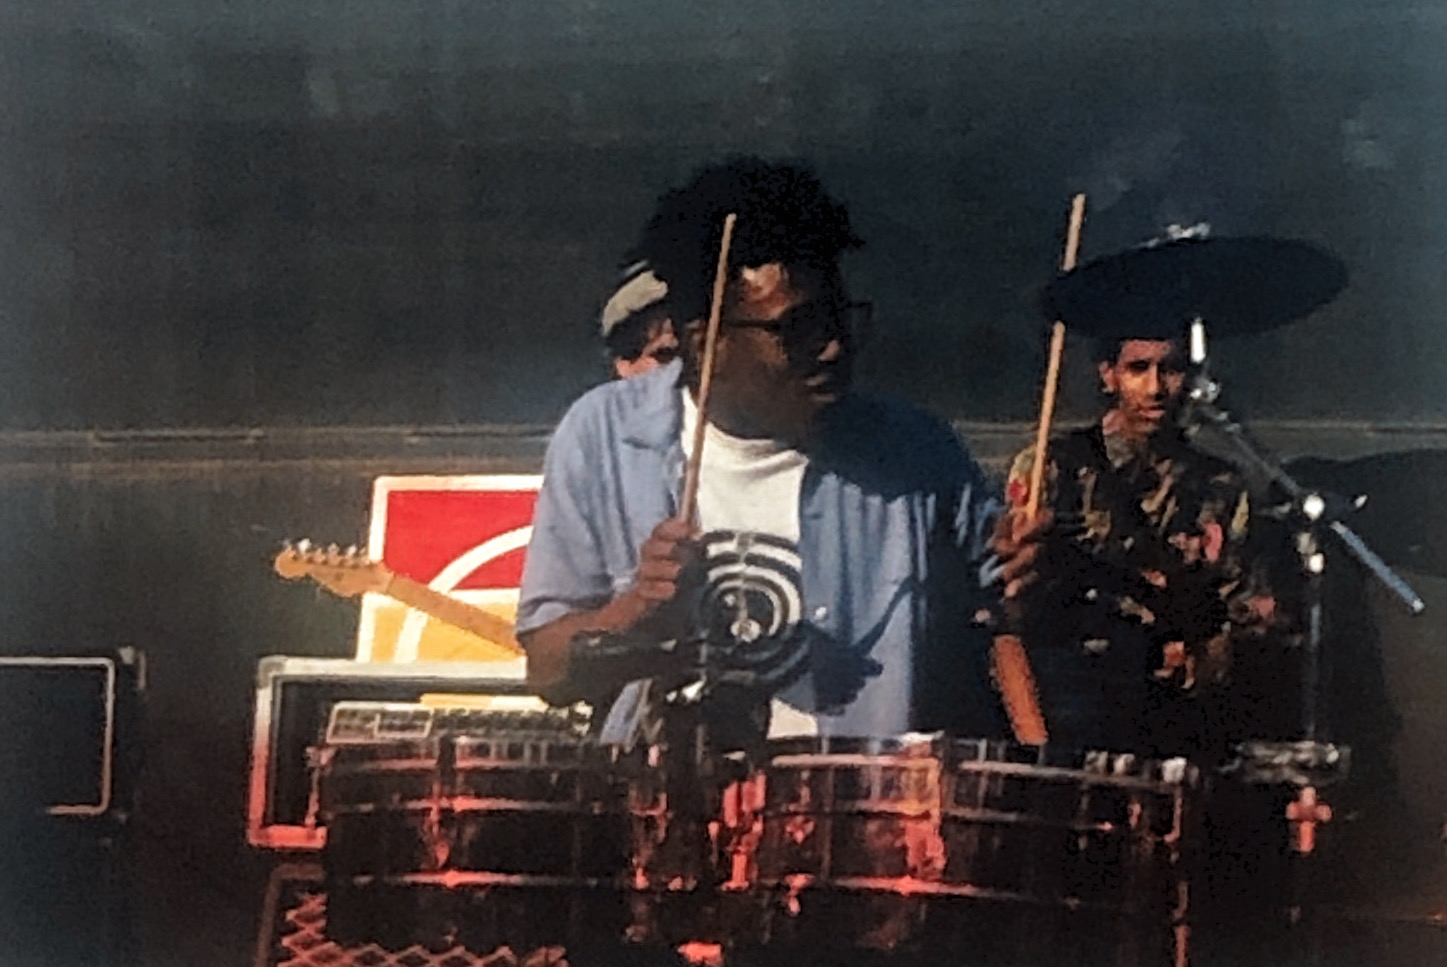 Clinton Cameron on timbales performing with the band Section 8 some time between  1987 and 1992. 